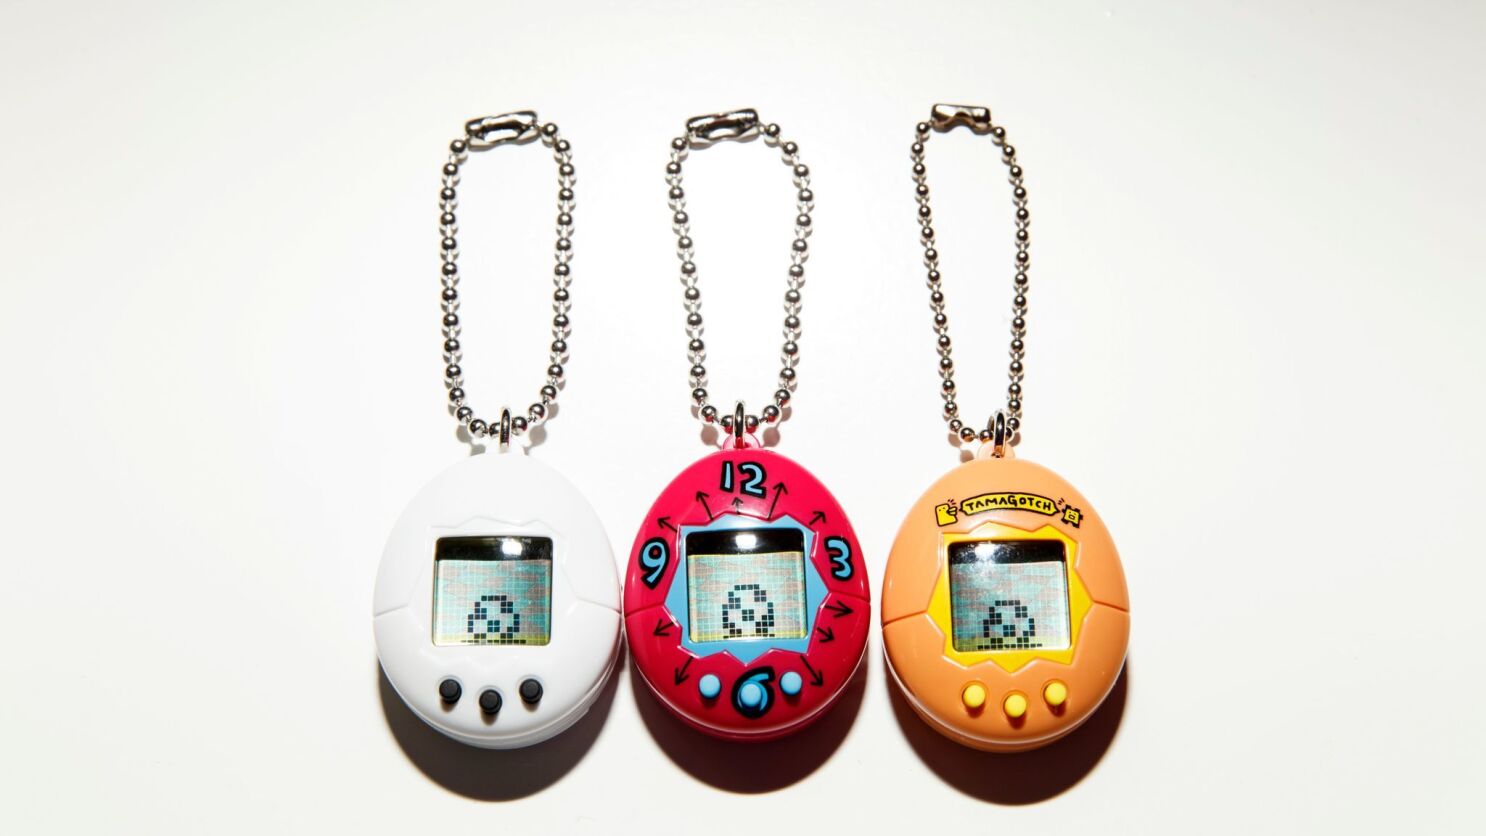 Did your Tamagotchi die of neglect in the late '90s? Now's your